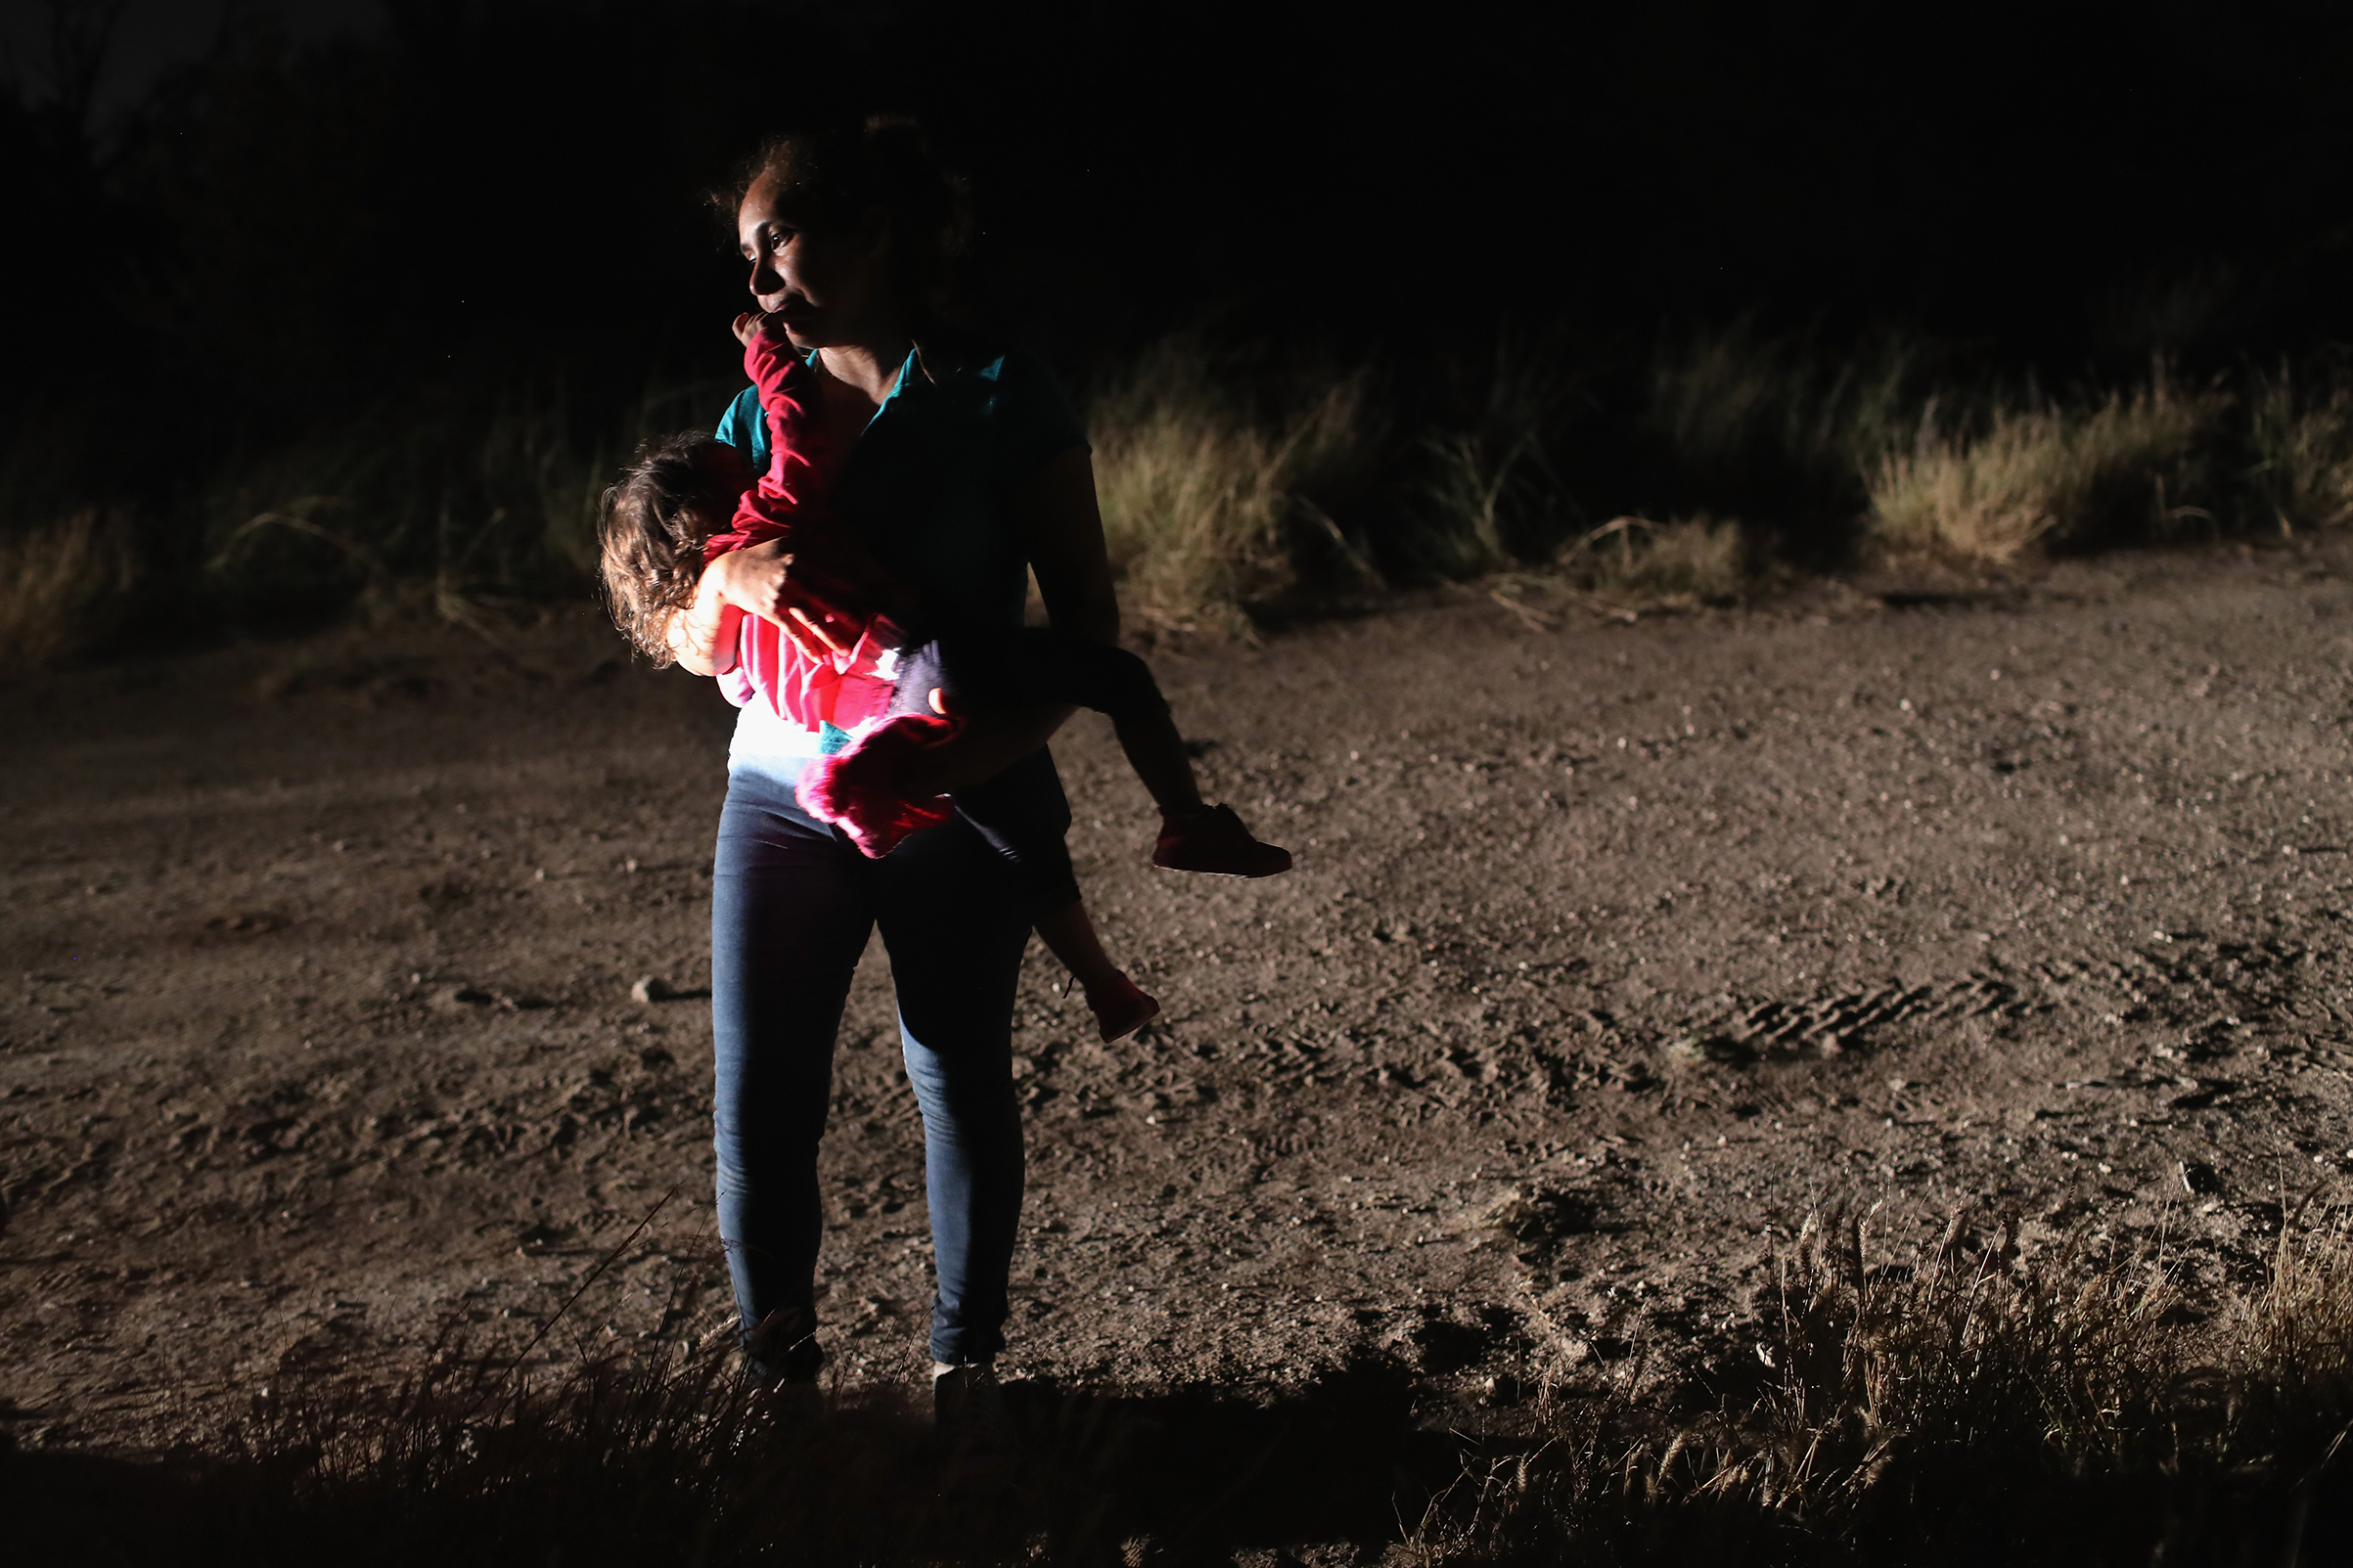 A Honduran mother holds her two-year-old daughter while being detained by U.S. Border Patrol agents near the U.S.-Mexico border on June 12, 2018 in McAllen, Texas. The asylum seekers were detained before being sent to a processing center for possible separation. Customs and Border Protection (CBP) is executing the Trump administration's "zero tolerance" policy towards undocumented immigrants. (John Moore—Getty Images)